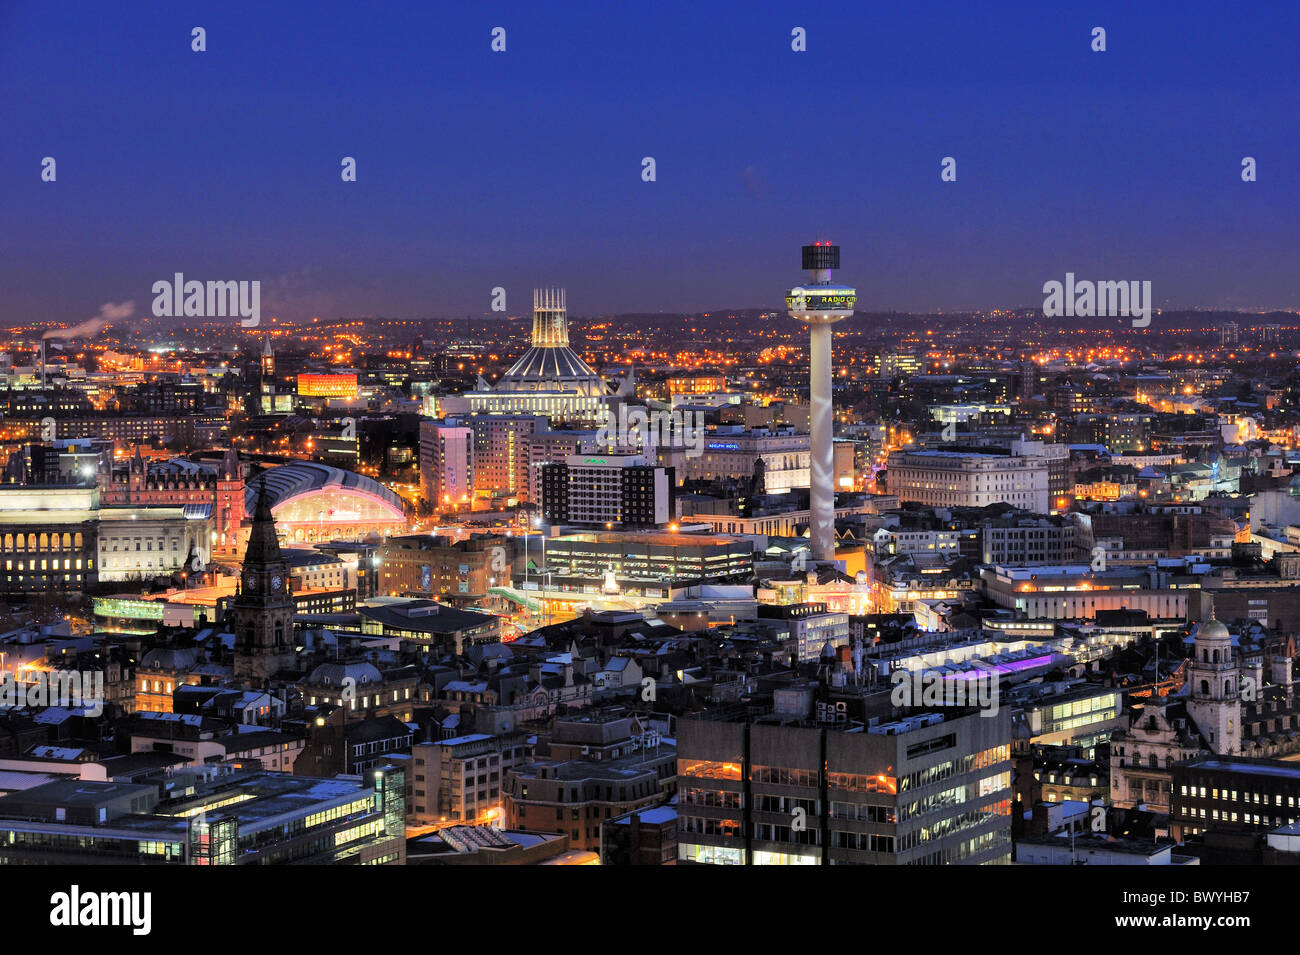 Liverpool City Centre at night showing Lime Street Station, Liverpool metropolitan Cathedral and Radio City tower. Stock Photo